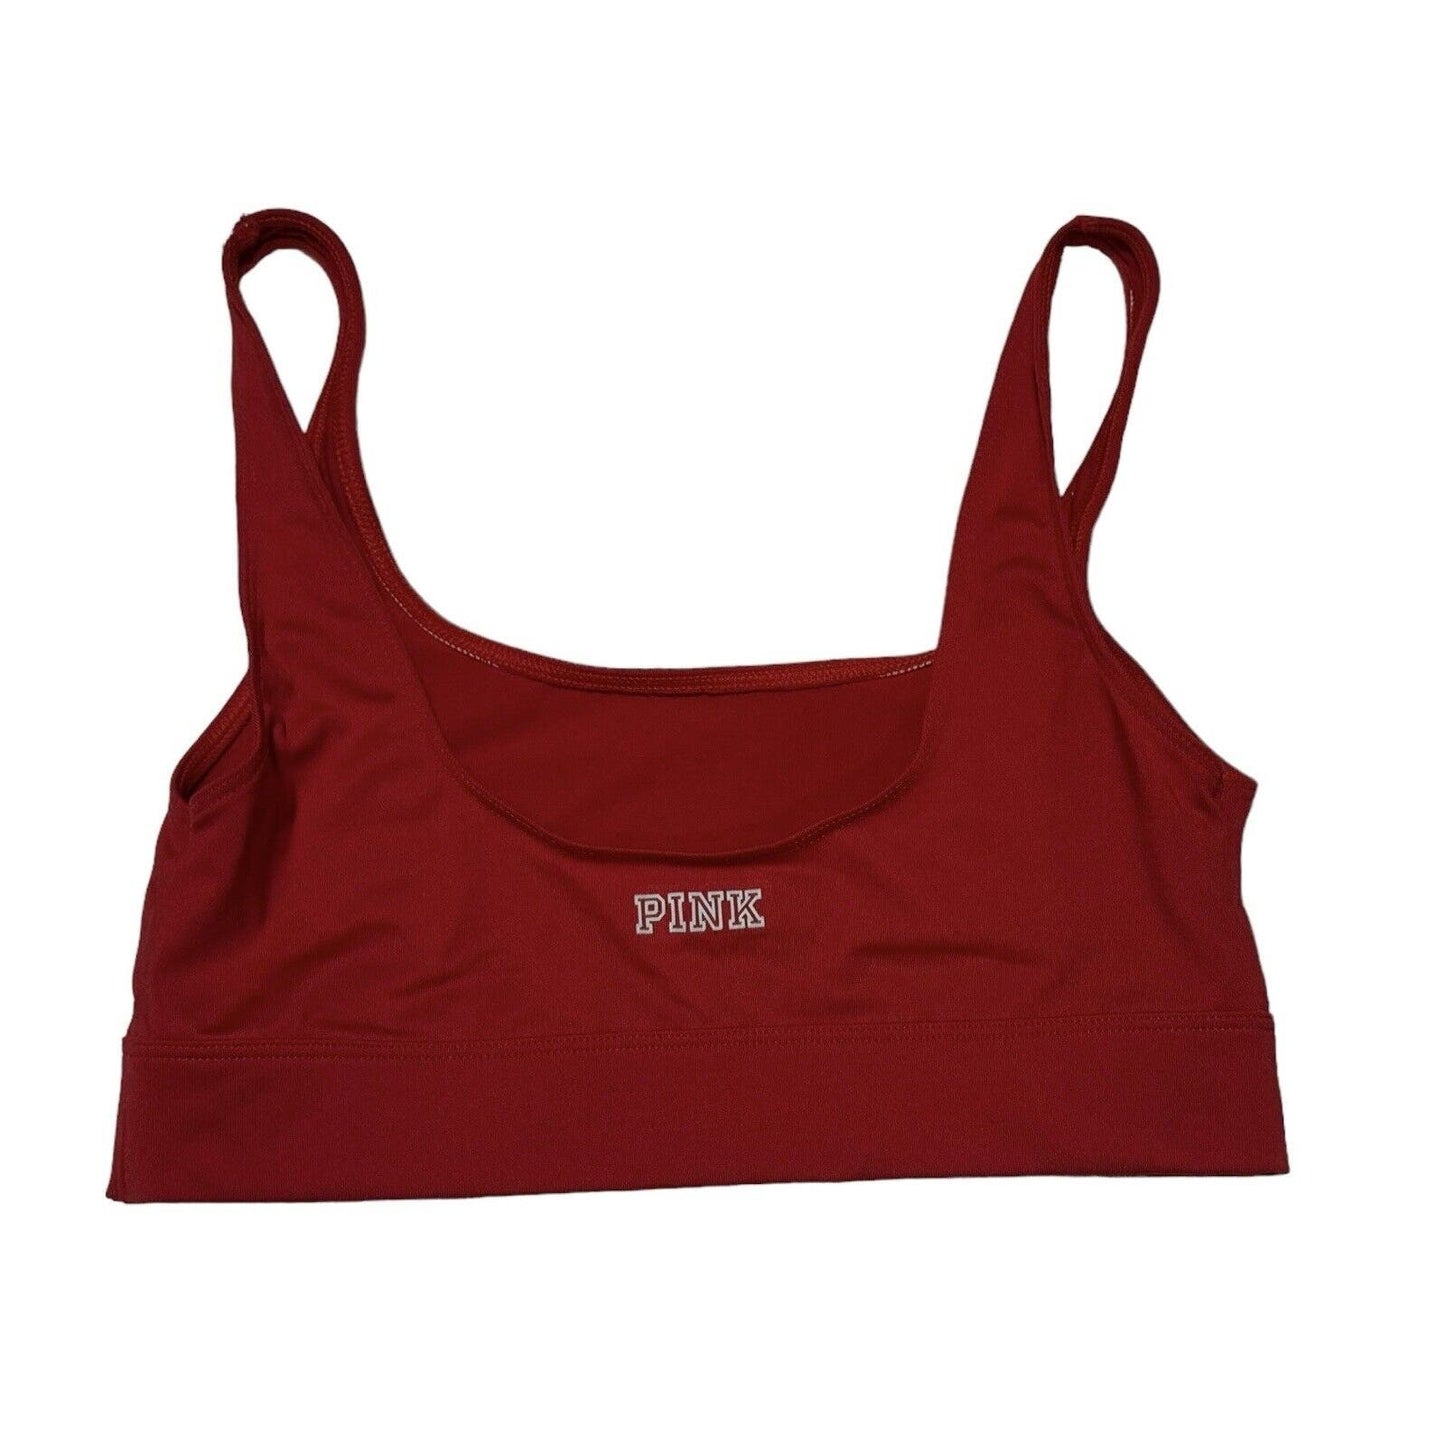 Victoria’s Secret PINK Ultimate Unlined Red Sports Bra Size Small